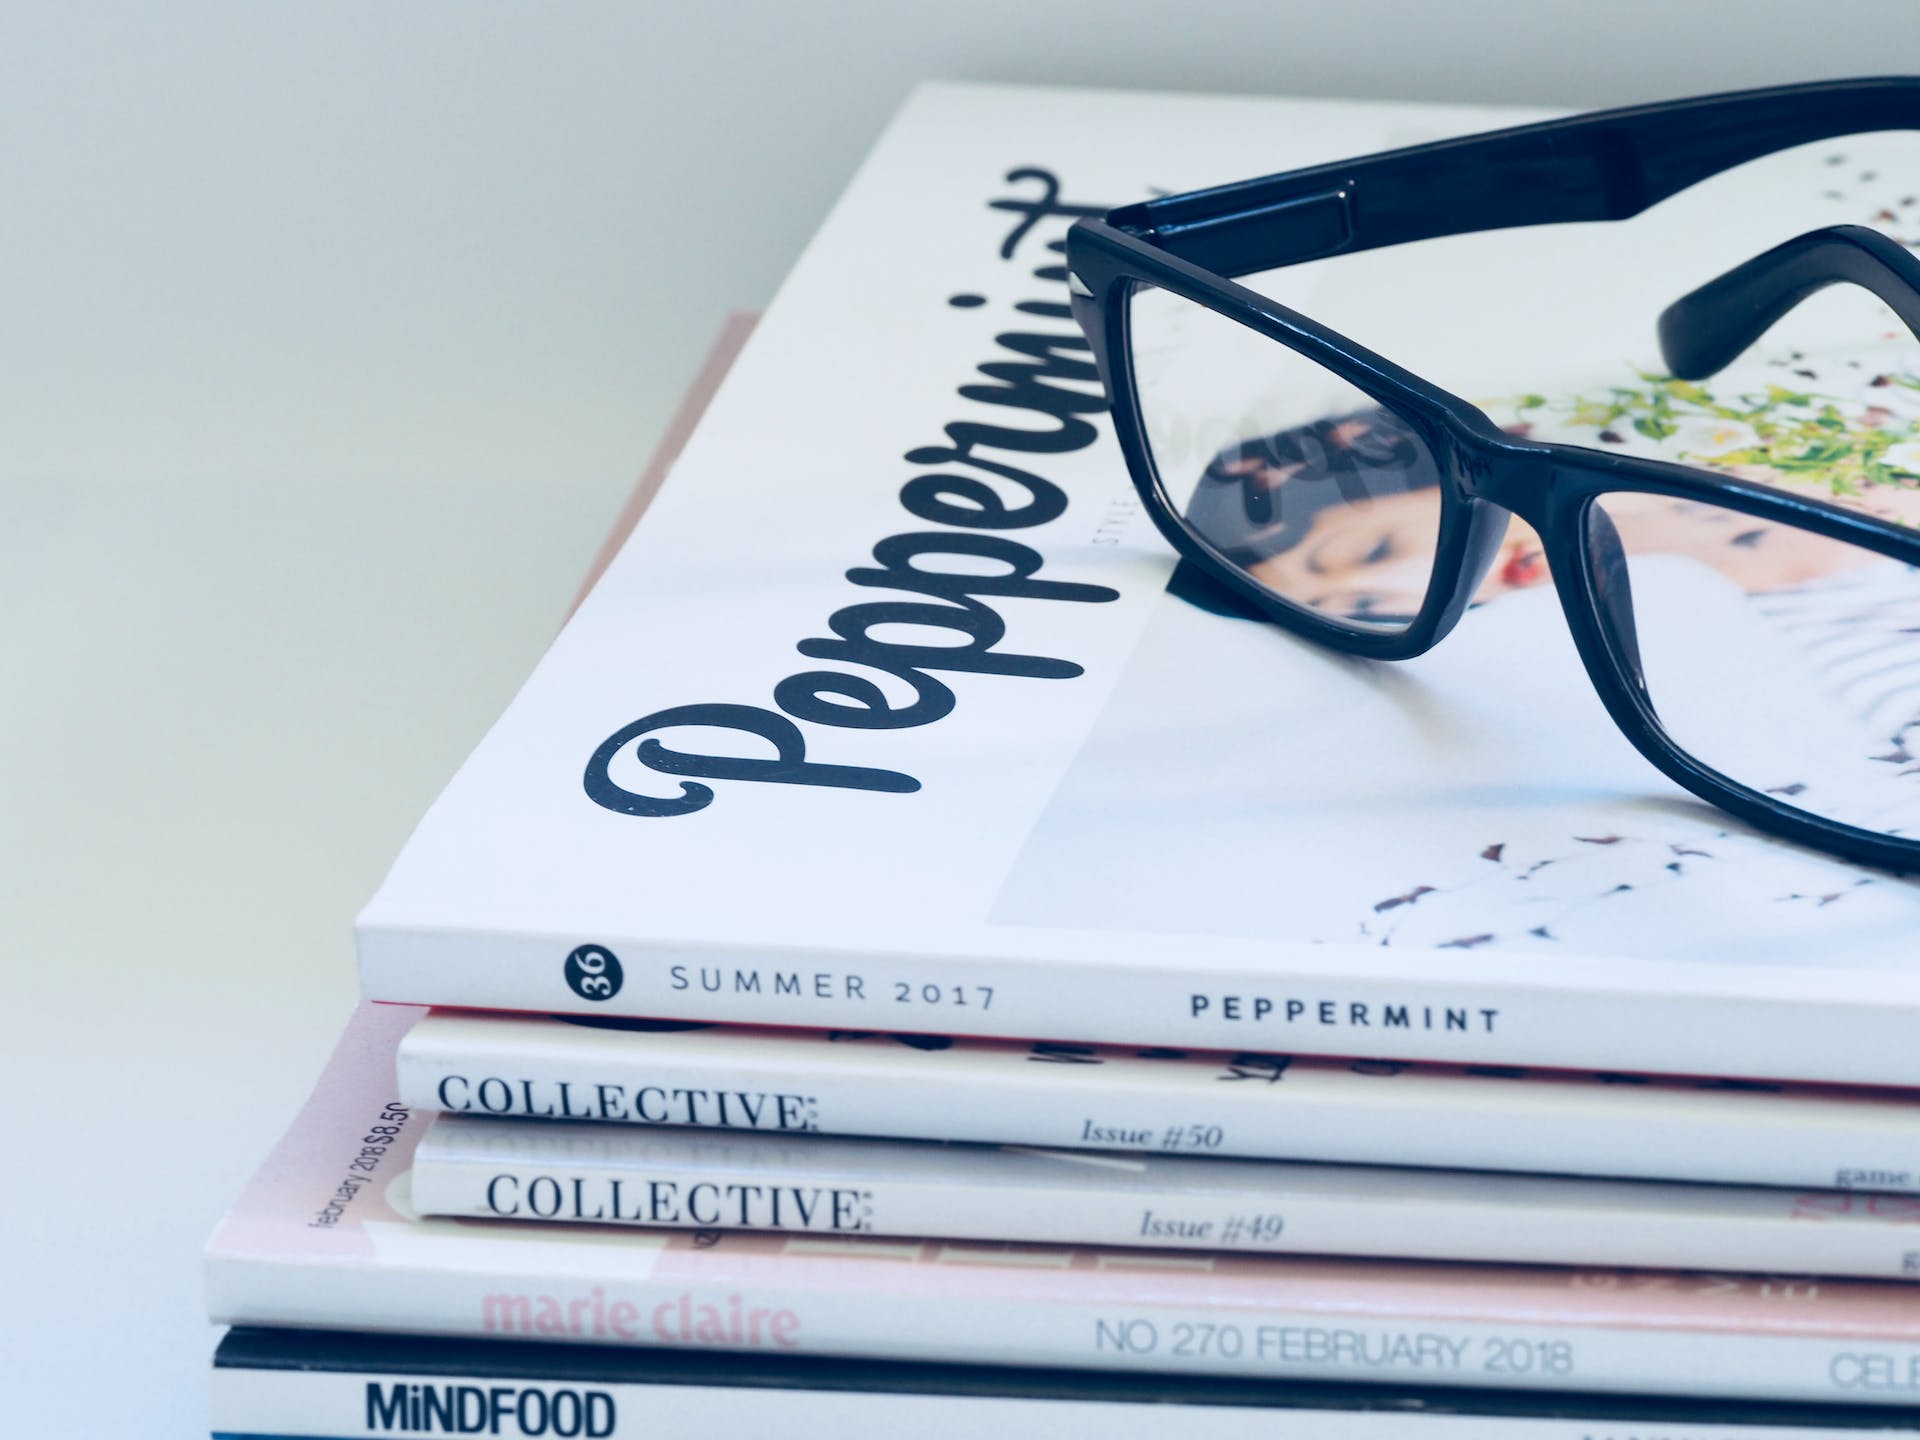 A pair of black sunglasses lying on a stack of magazines | Source: Pexels